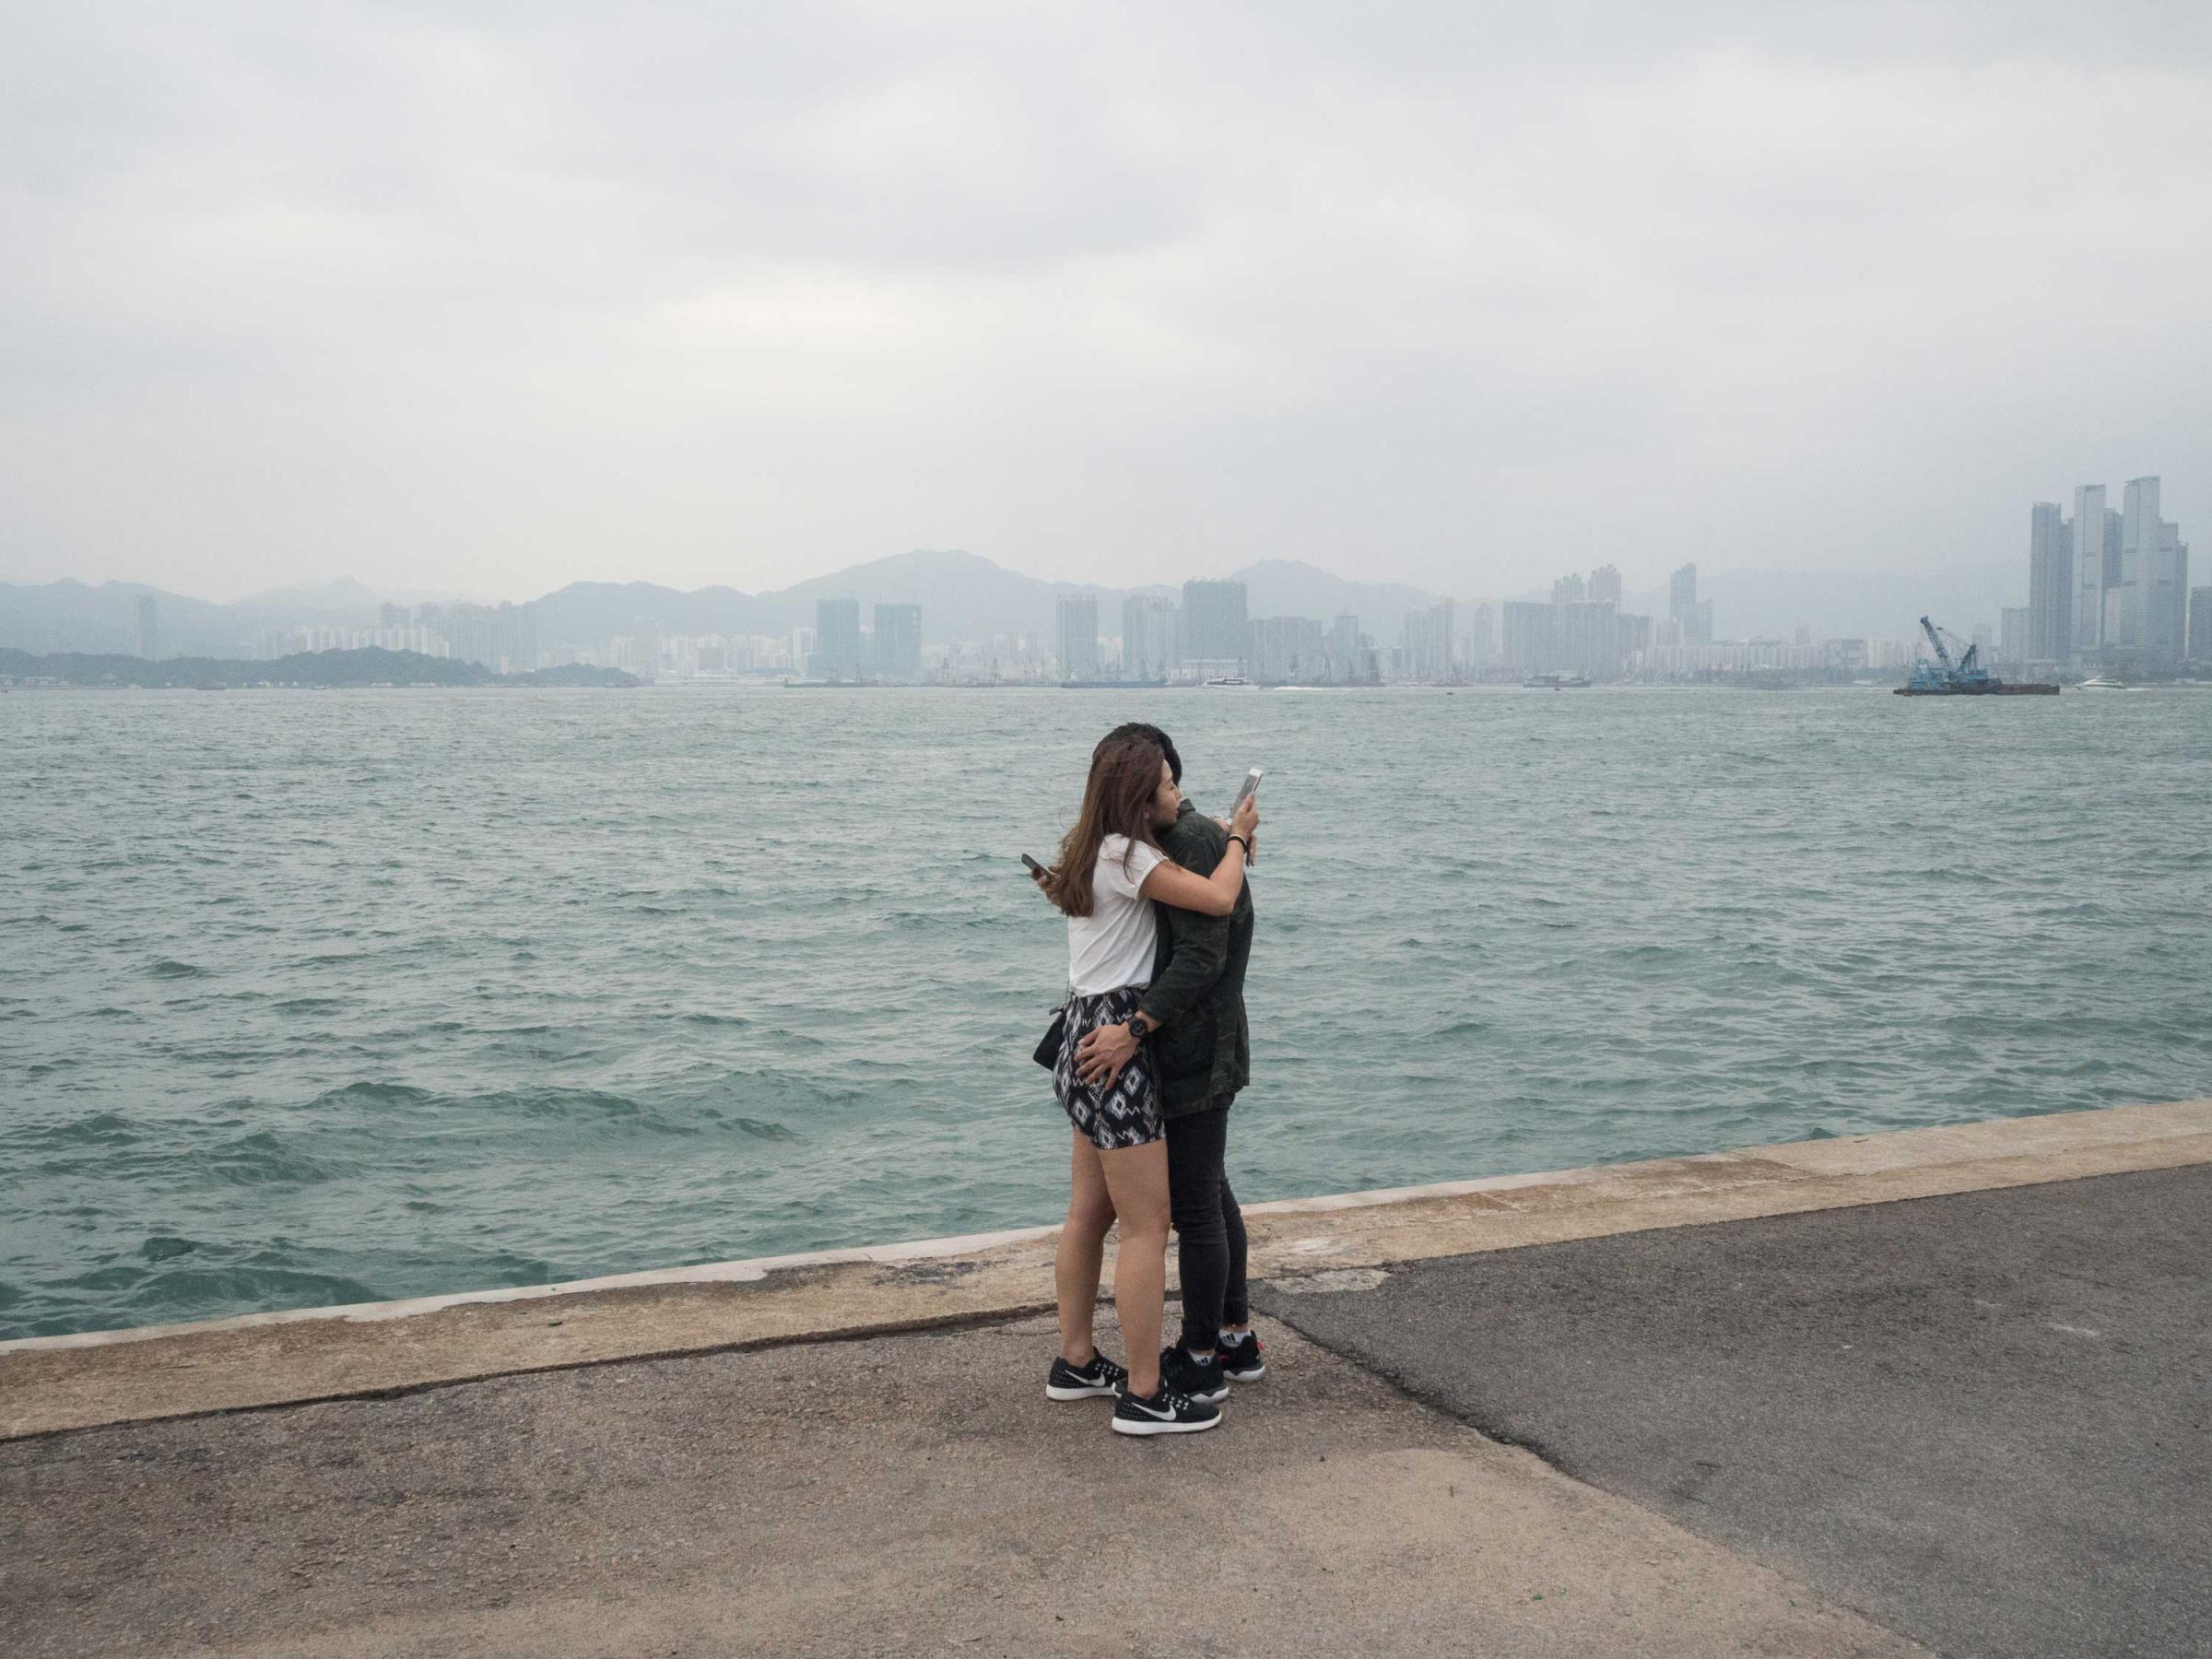 Hong Kong (Hong Kong SAR, China); Date (10, 30, 2016); two young lovers embrace in a hugh while checking their phones. "Instagram pier" is a public cargo pier located on the west side of Hong Kong island; here locals gather for fishing, excercising or walking their pets. More recently the Pier has raised to fame as the “instagram Pier”, whereyoung Hong Kongers and instagrammers come for selfies and scenic photos. I have recently begun curating its "instagram" dedicated account (@insta_pier).